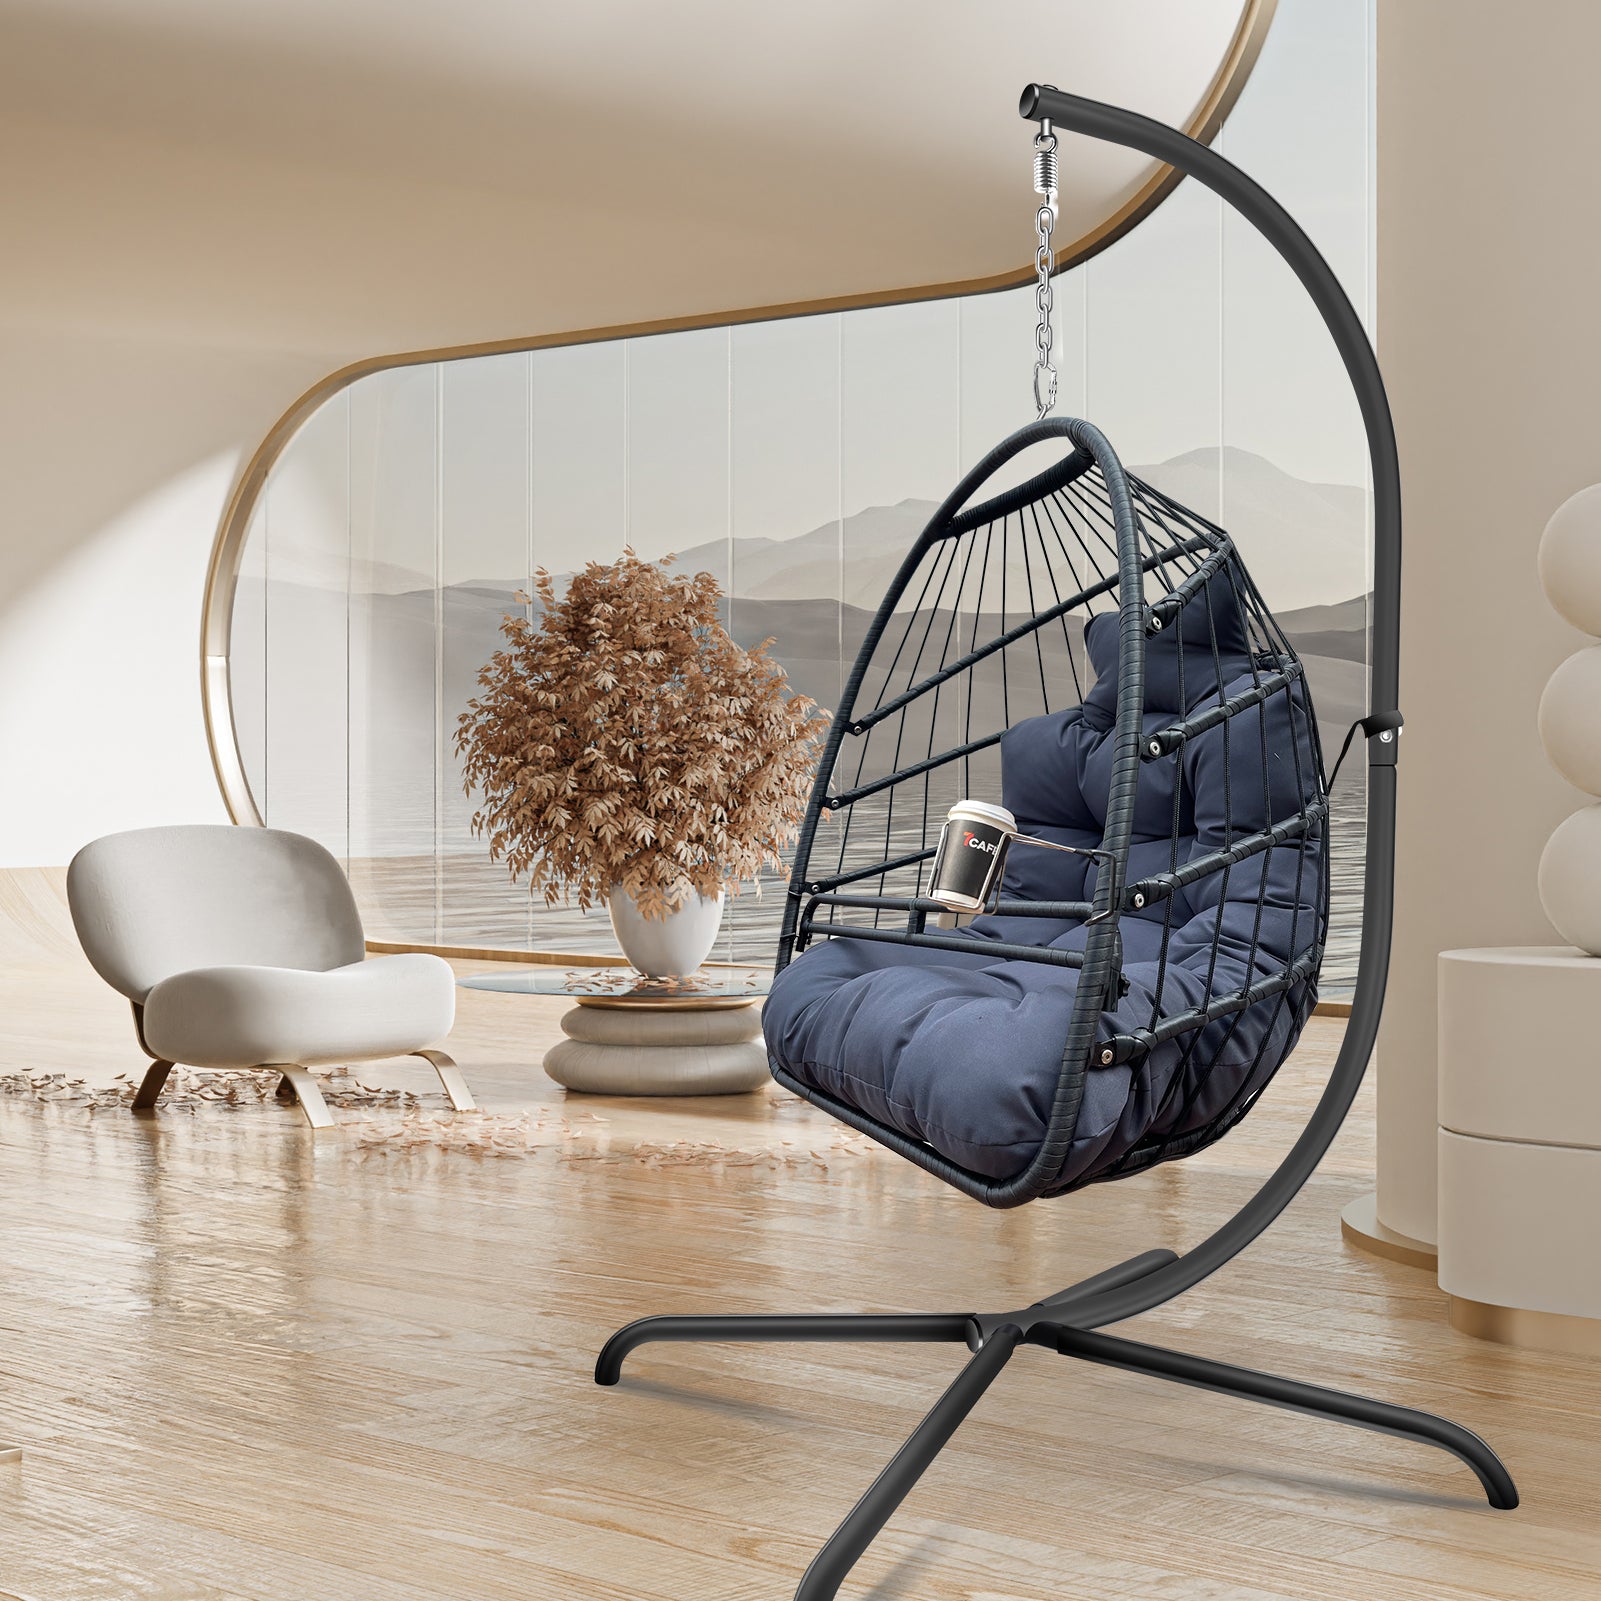 ZNTS Swing Egg Chair with Stand Indoor Outdoor Wicker Rattan Patio Basket Hanging Chair with C Type W1132103485